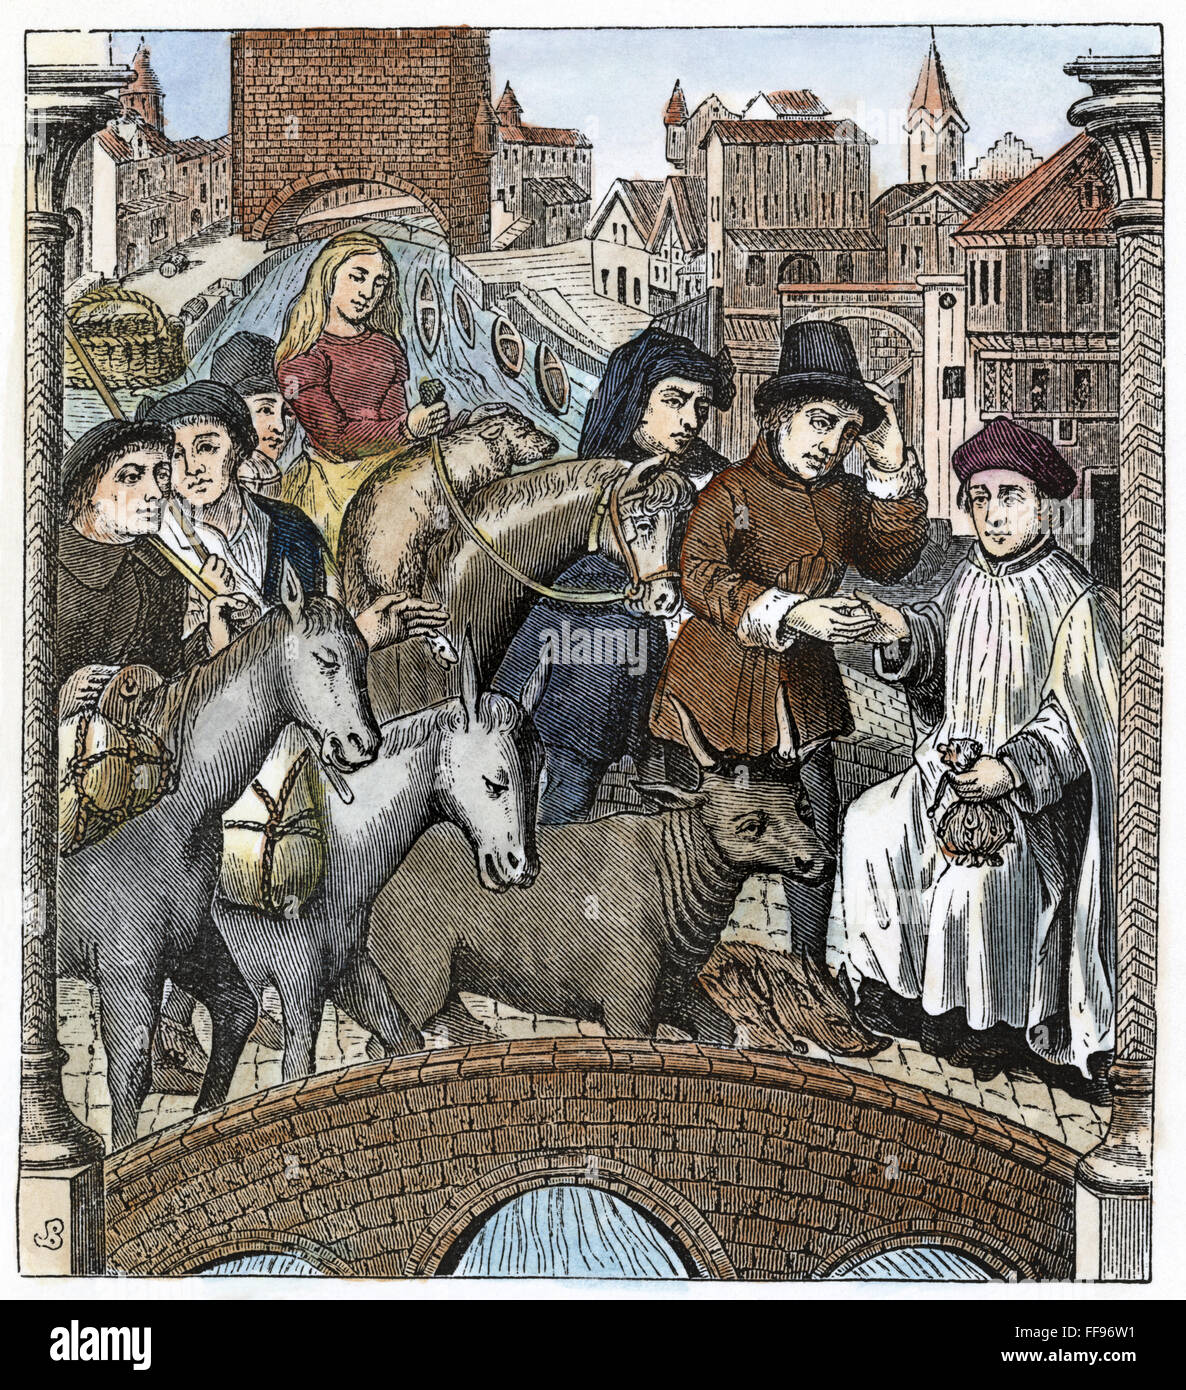 MEDIEVAL TOLL BRIDGE. /nA medieval party paying the toll to cross a bridge. Engraving after a 15th century stained glass window from the Cathedral of Tournay. Stock Photo